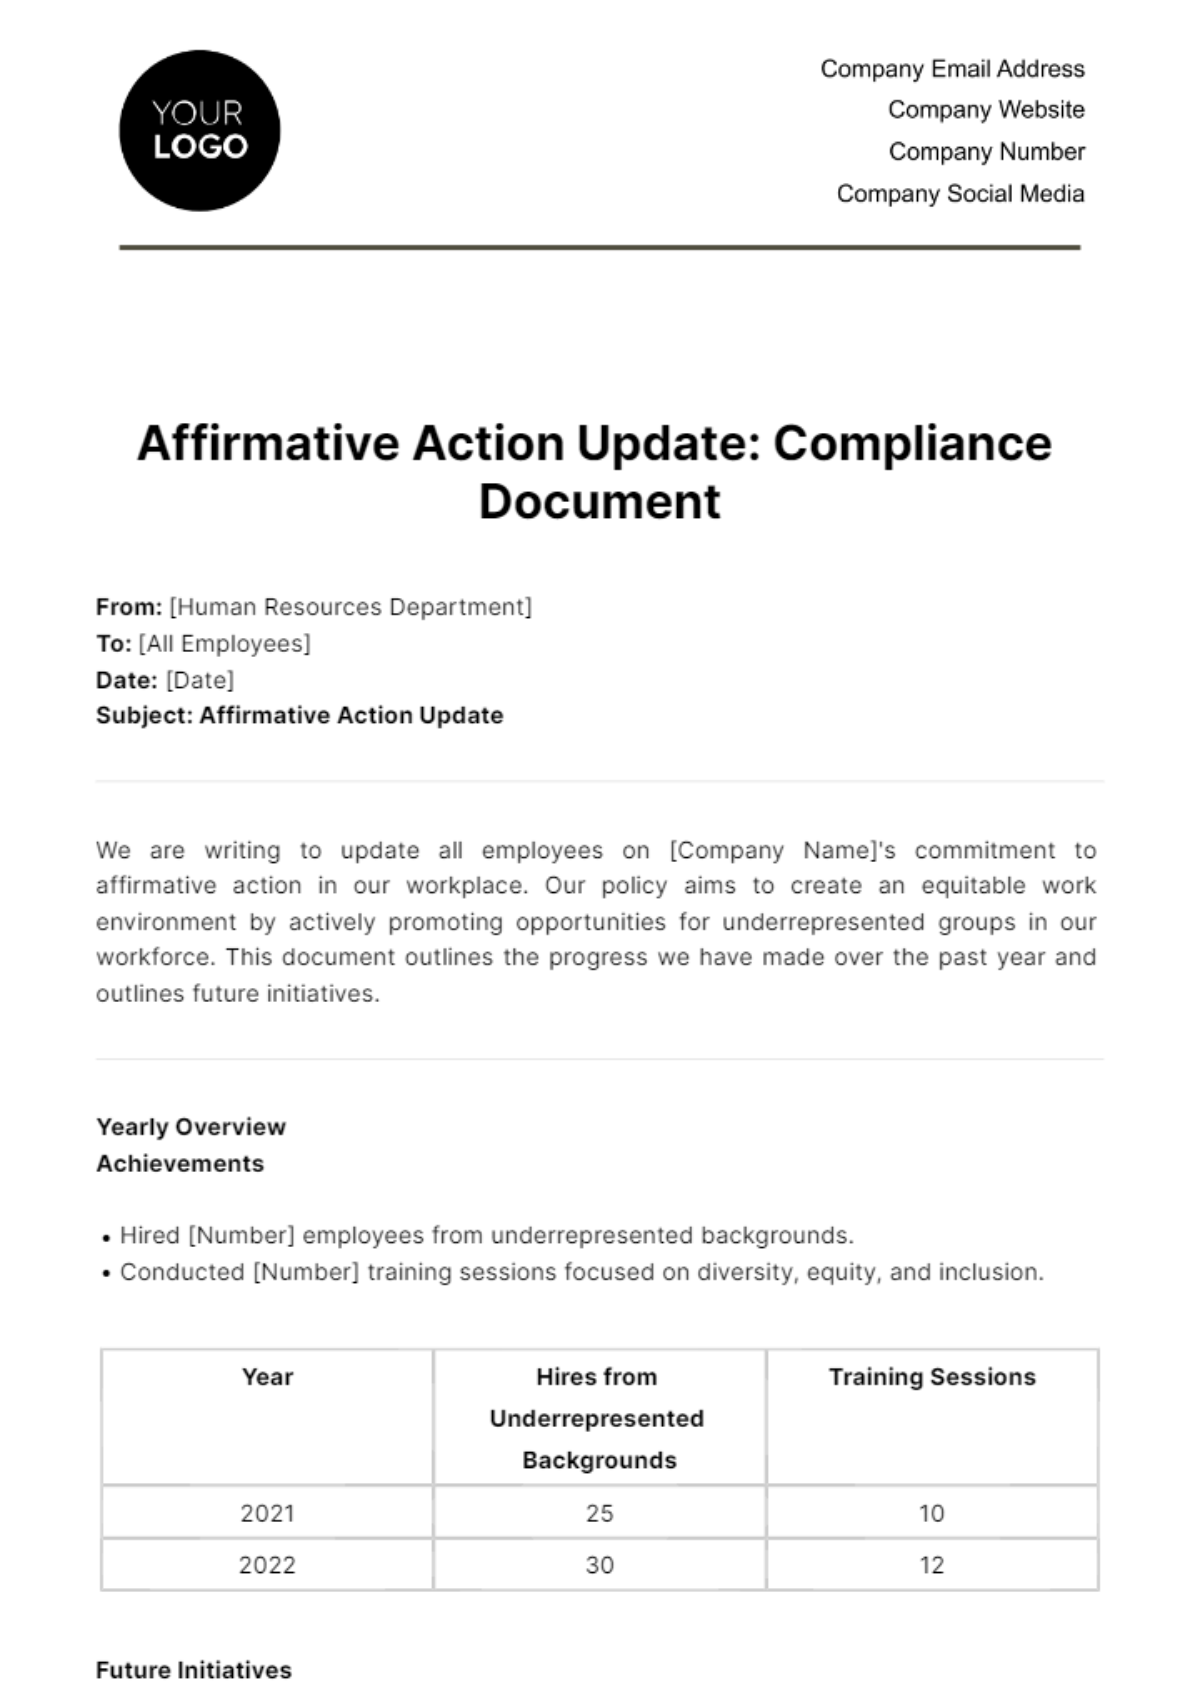 Free Affirmative Action Update HR Template